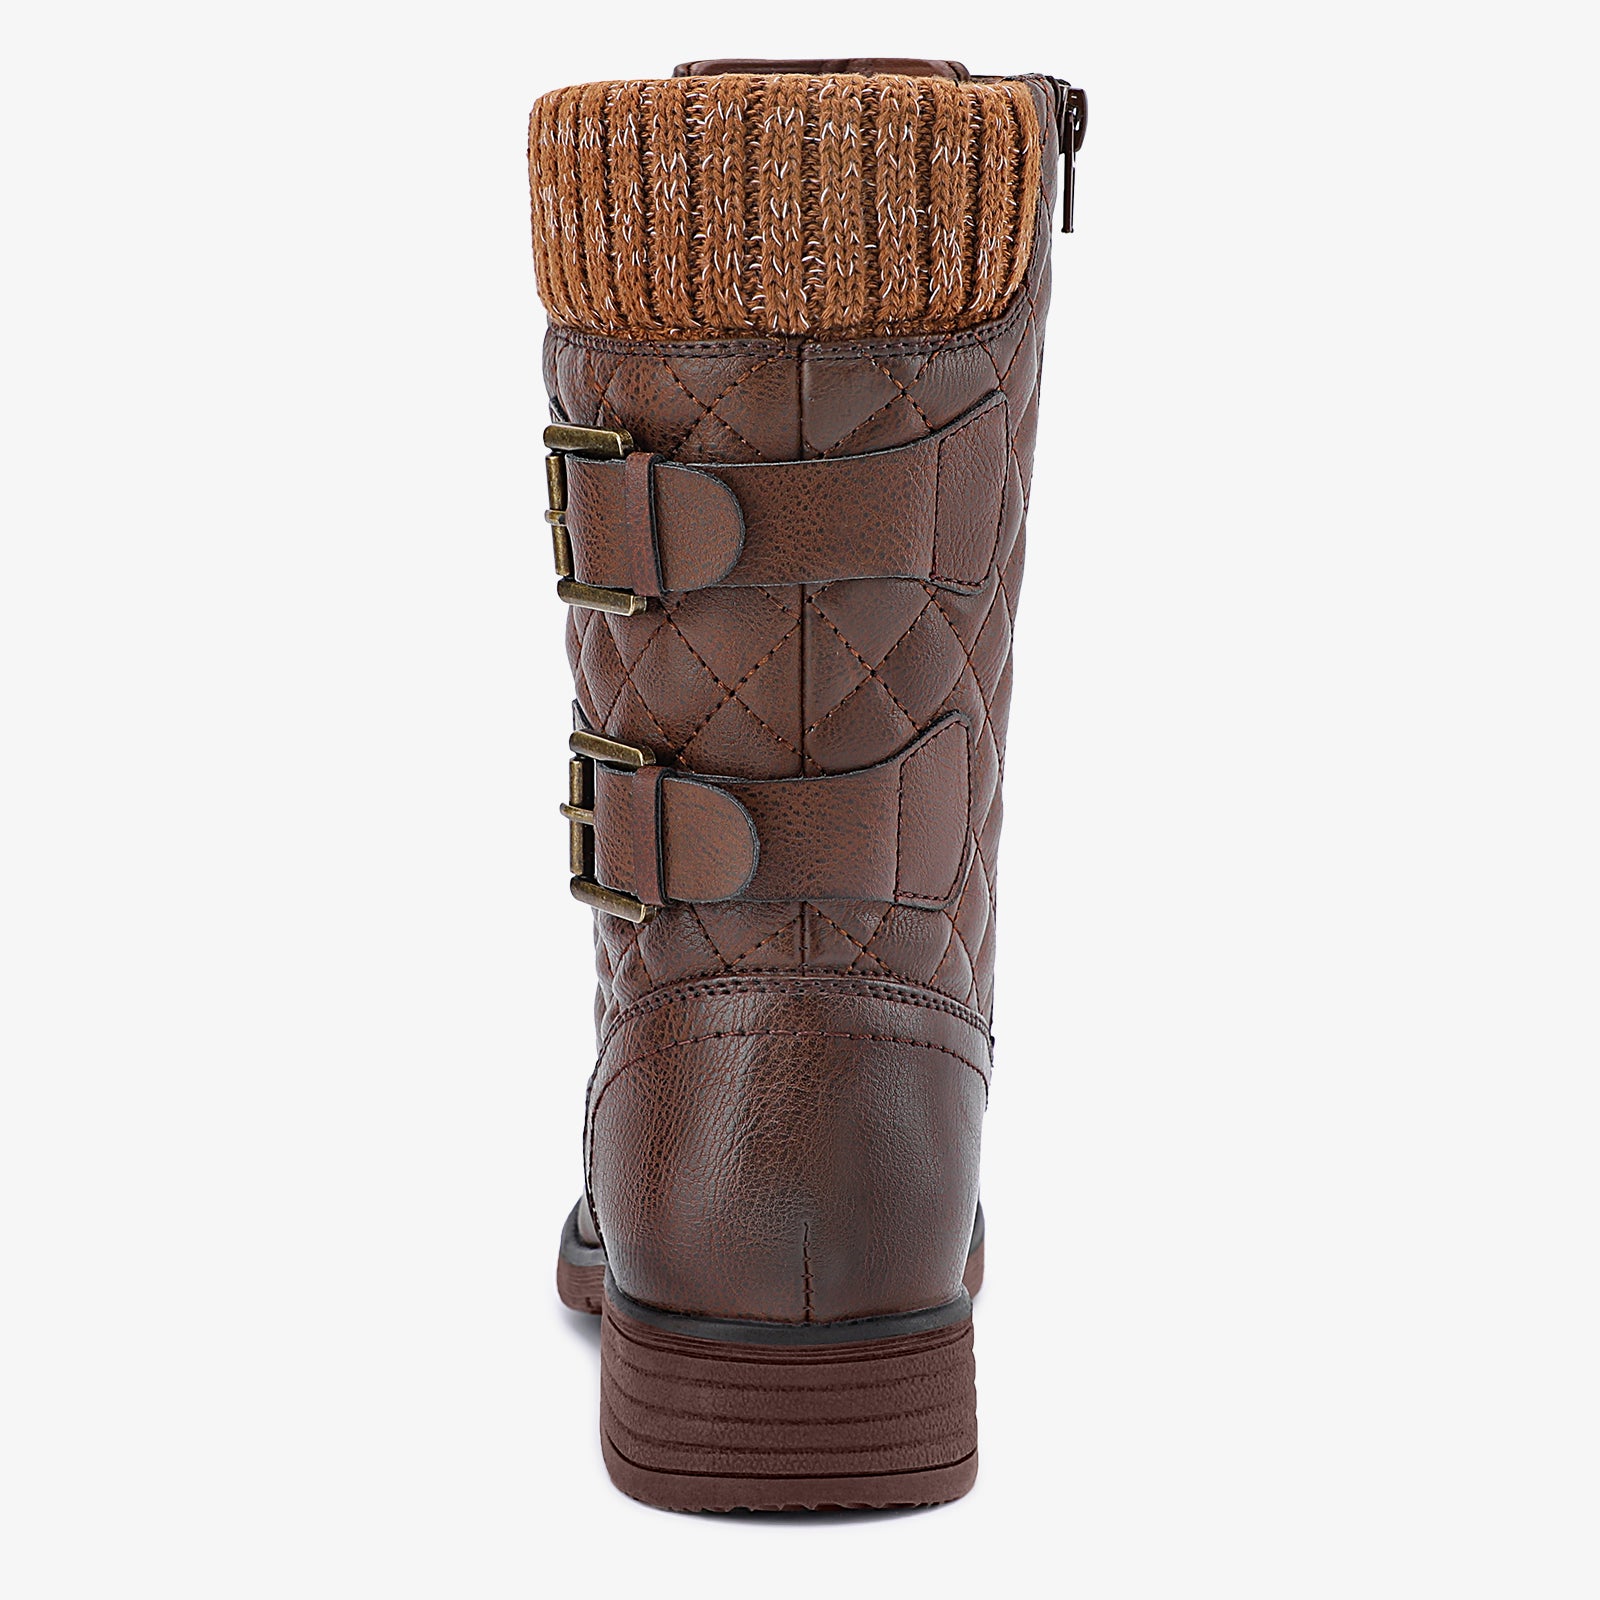 stq-women-combat-boots-product-view-brown